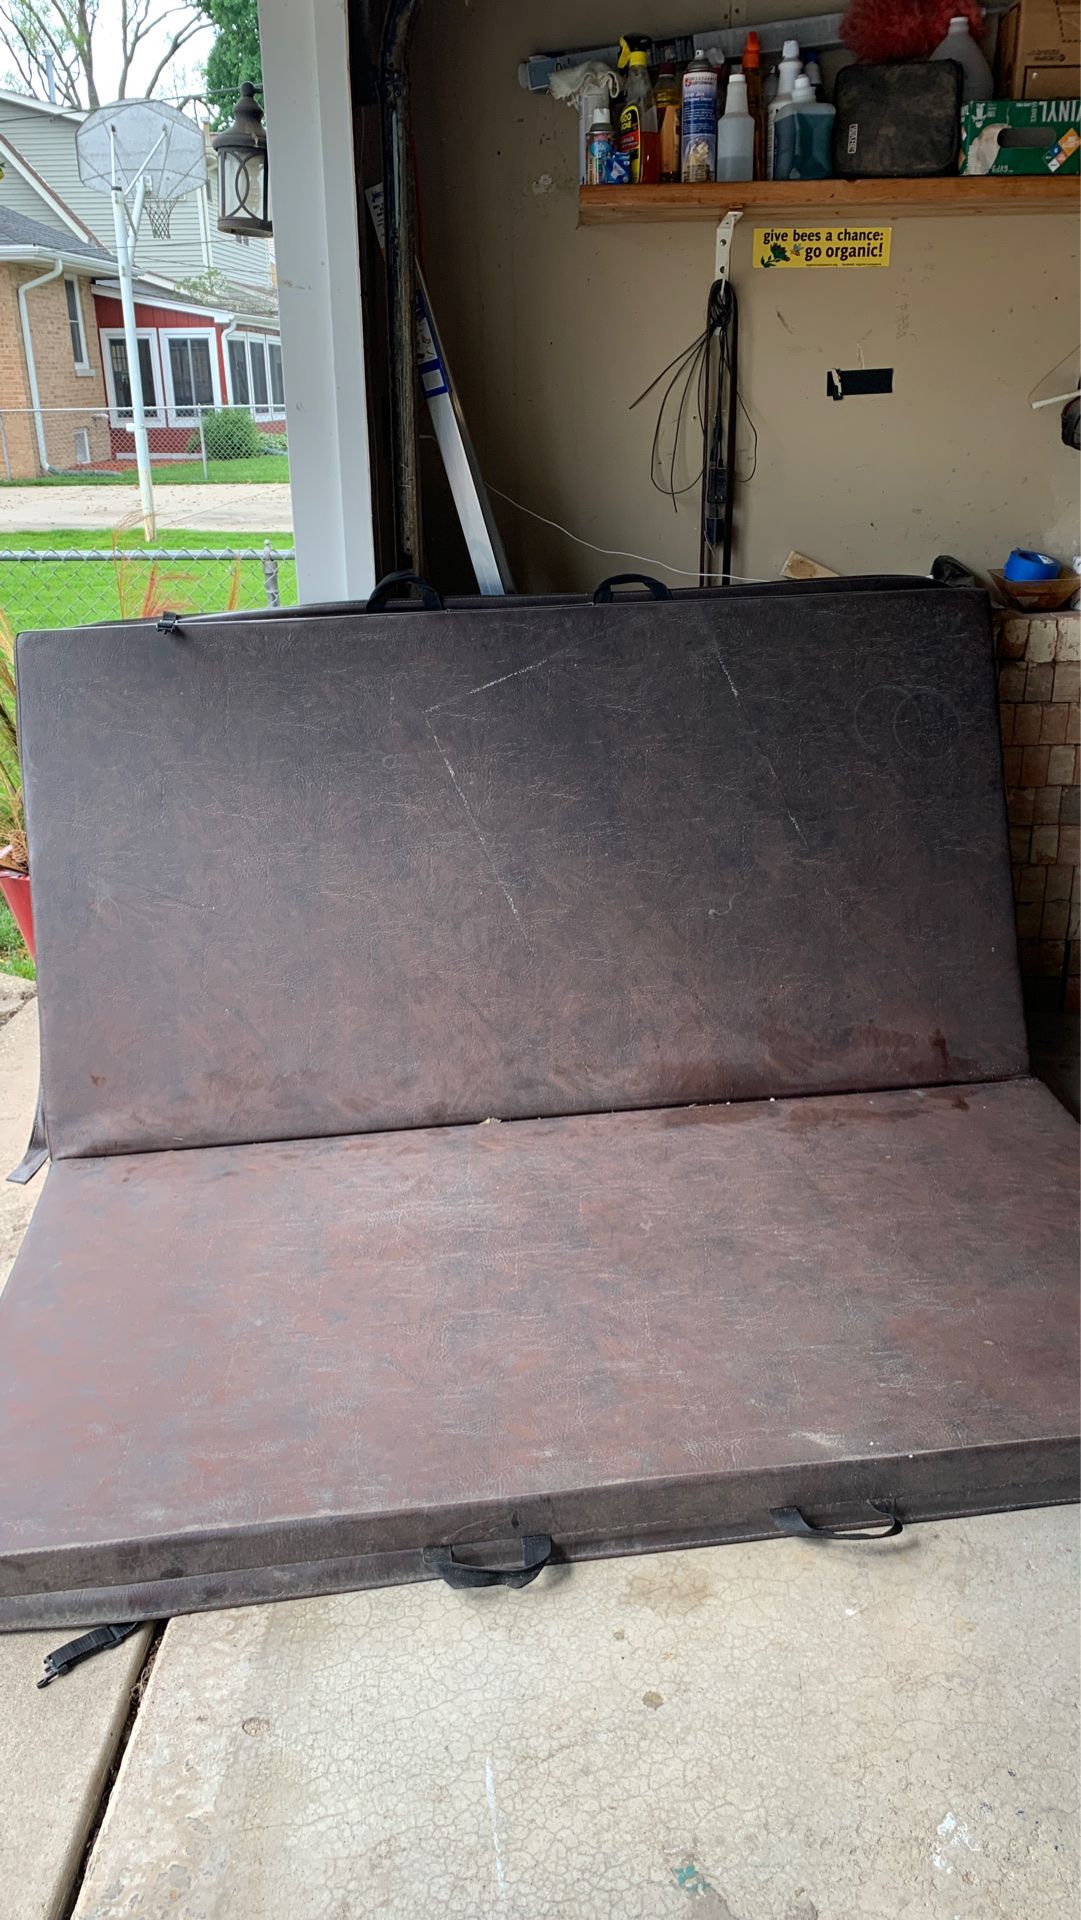 Cover for hot tub $100 obo size: 76 x81